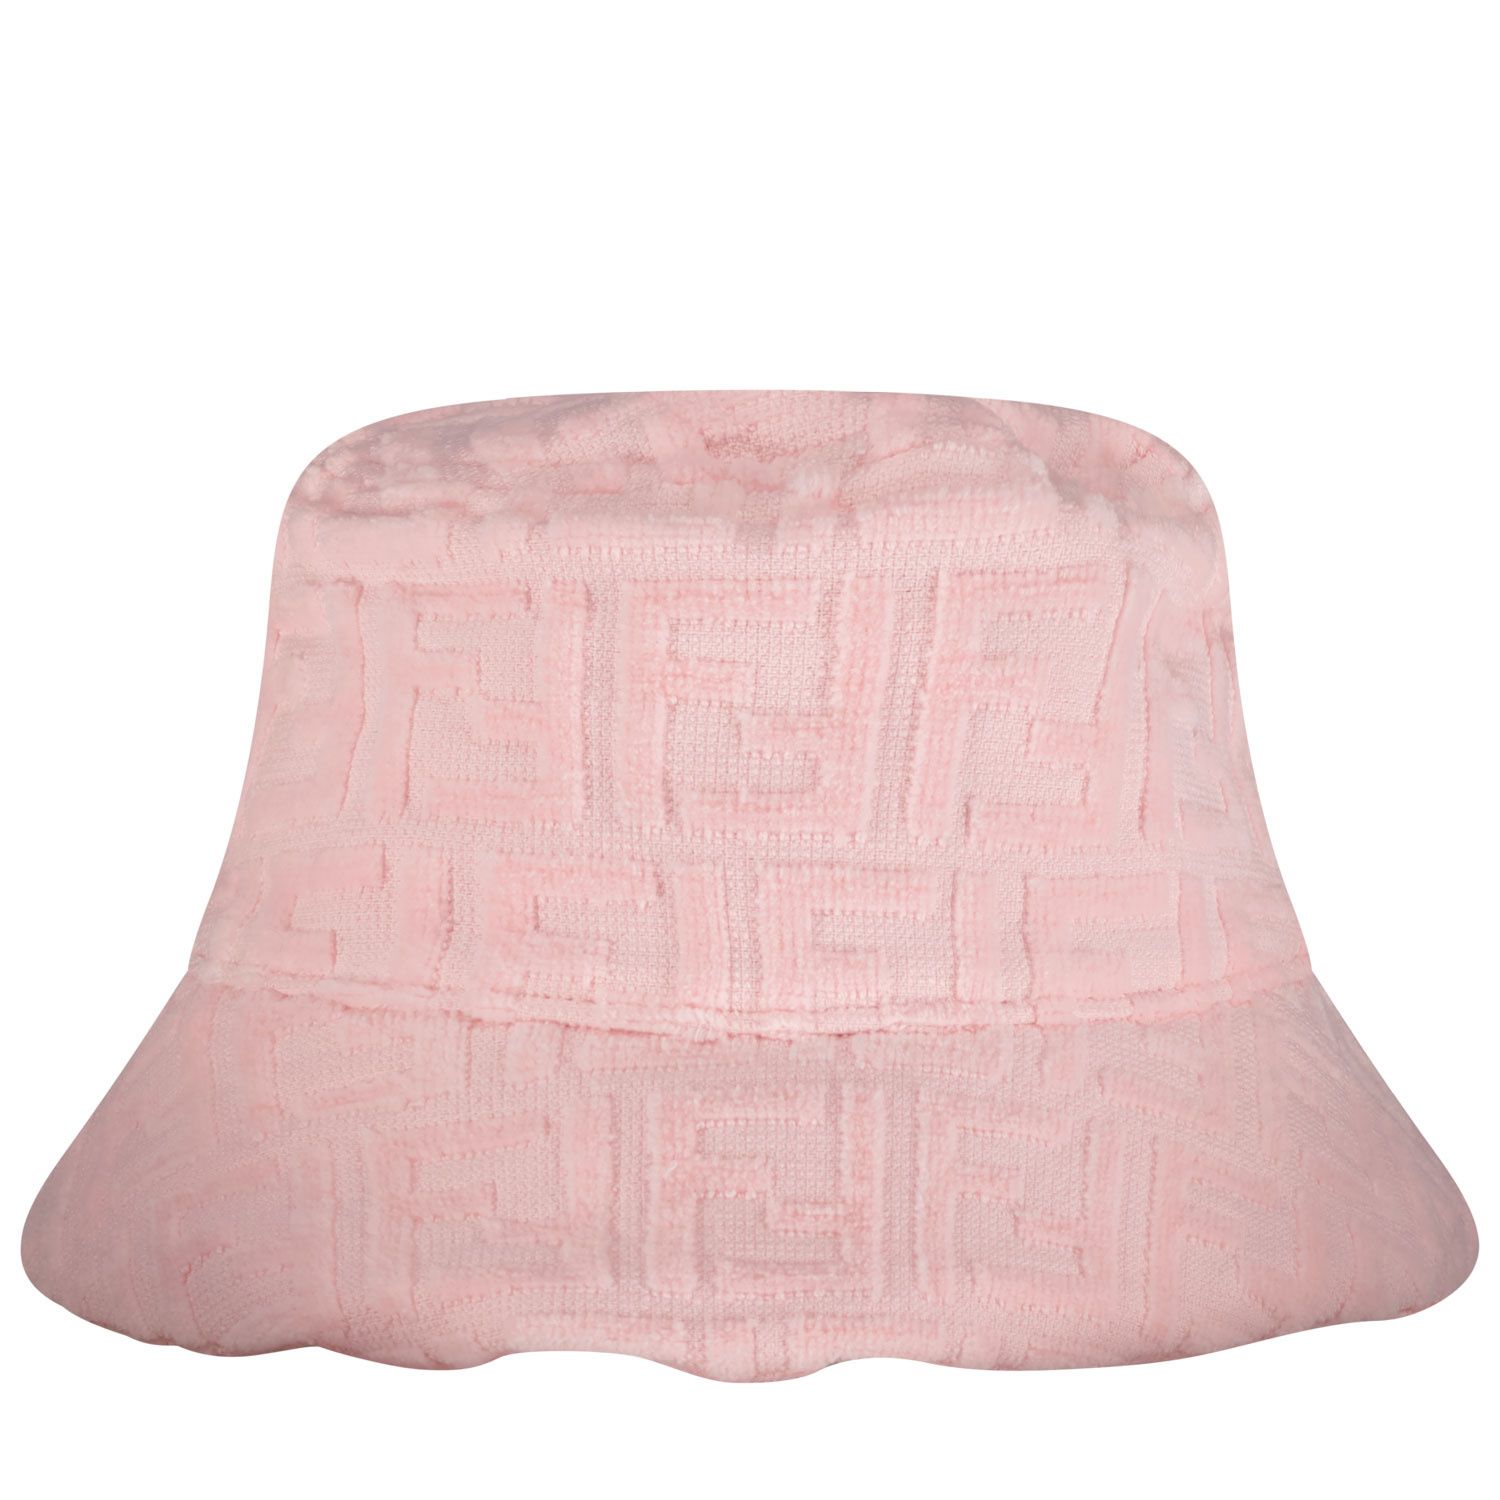 Picture of Fendi BUP041 AIP2 baby hat light pink